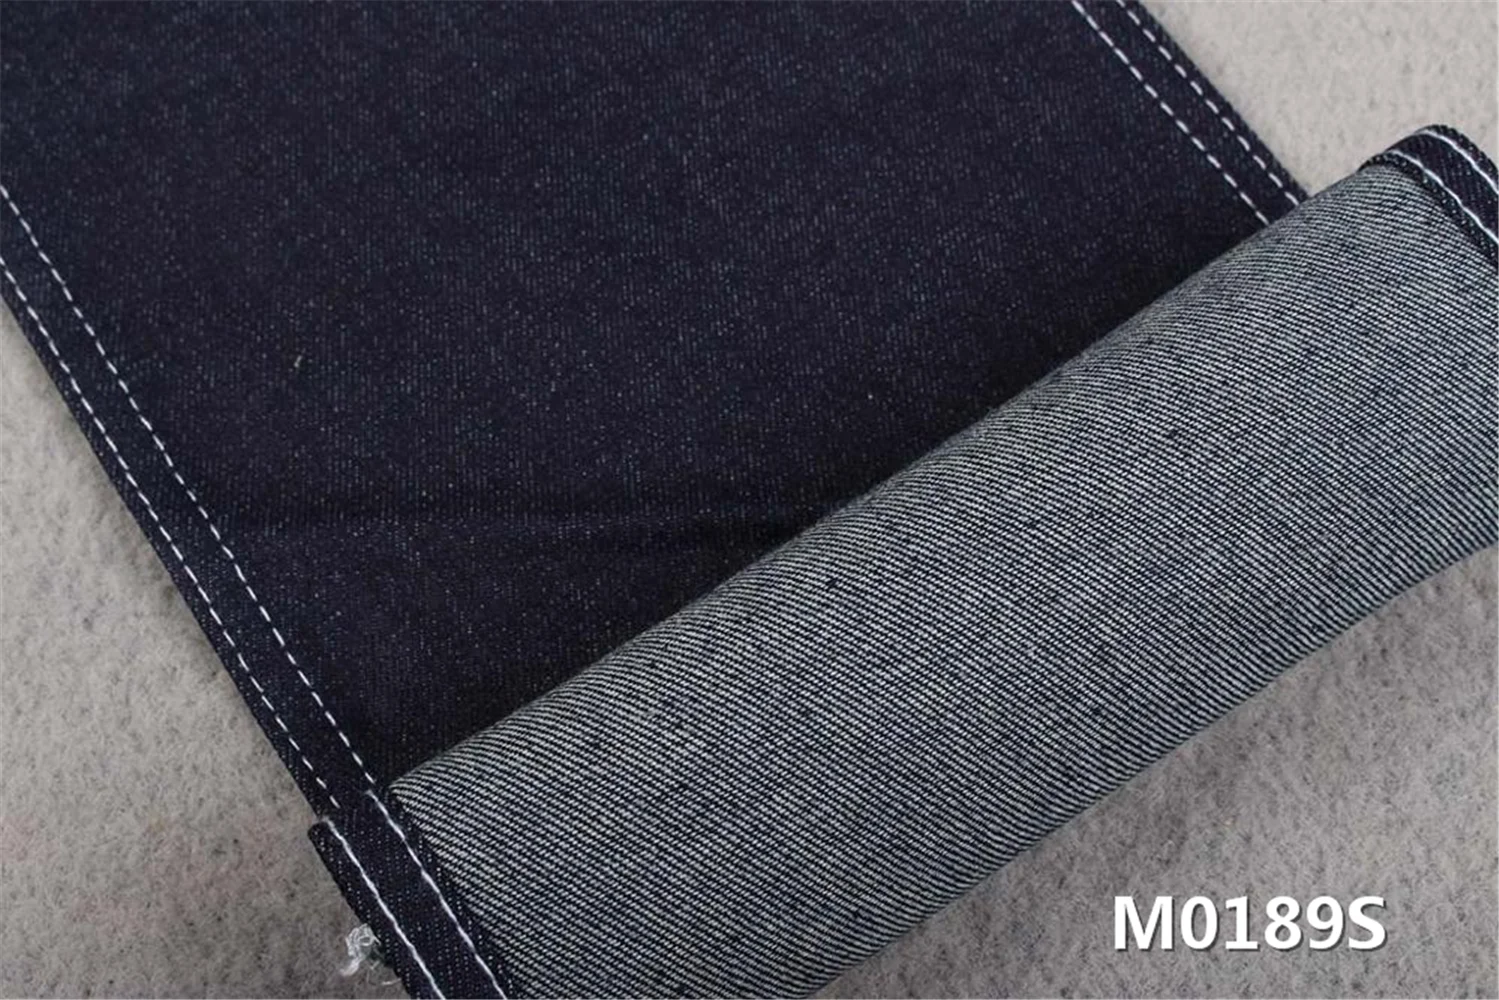 11 oz 100% cotton denim jean fabric roll  with competitive price for wholesale